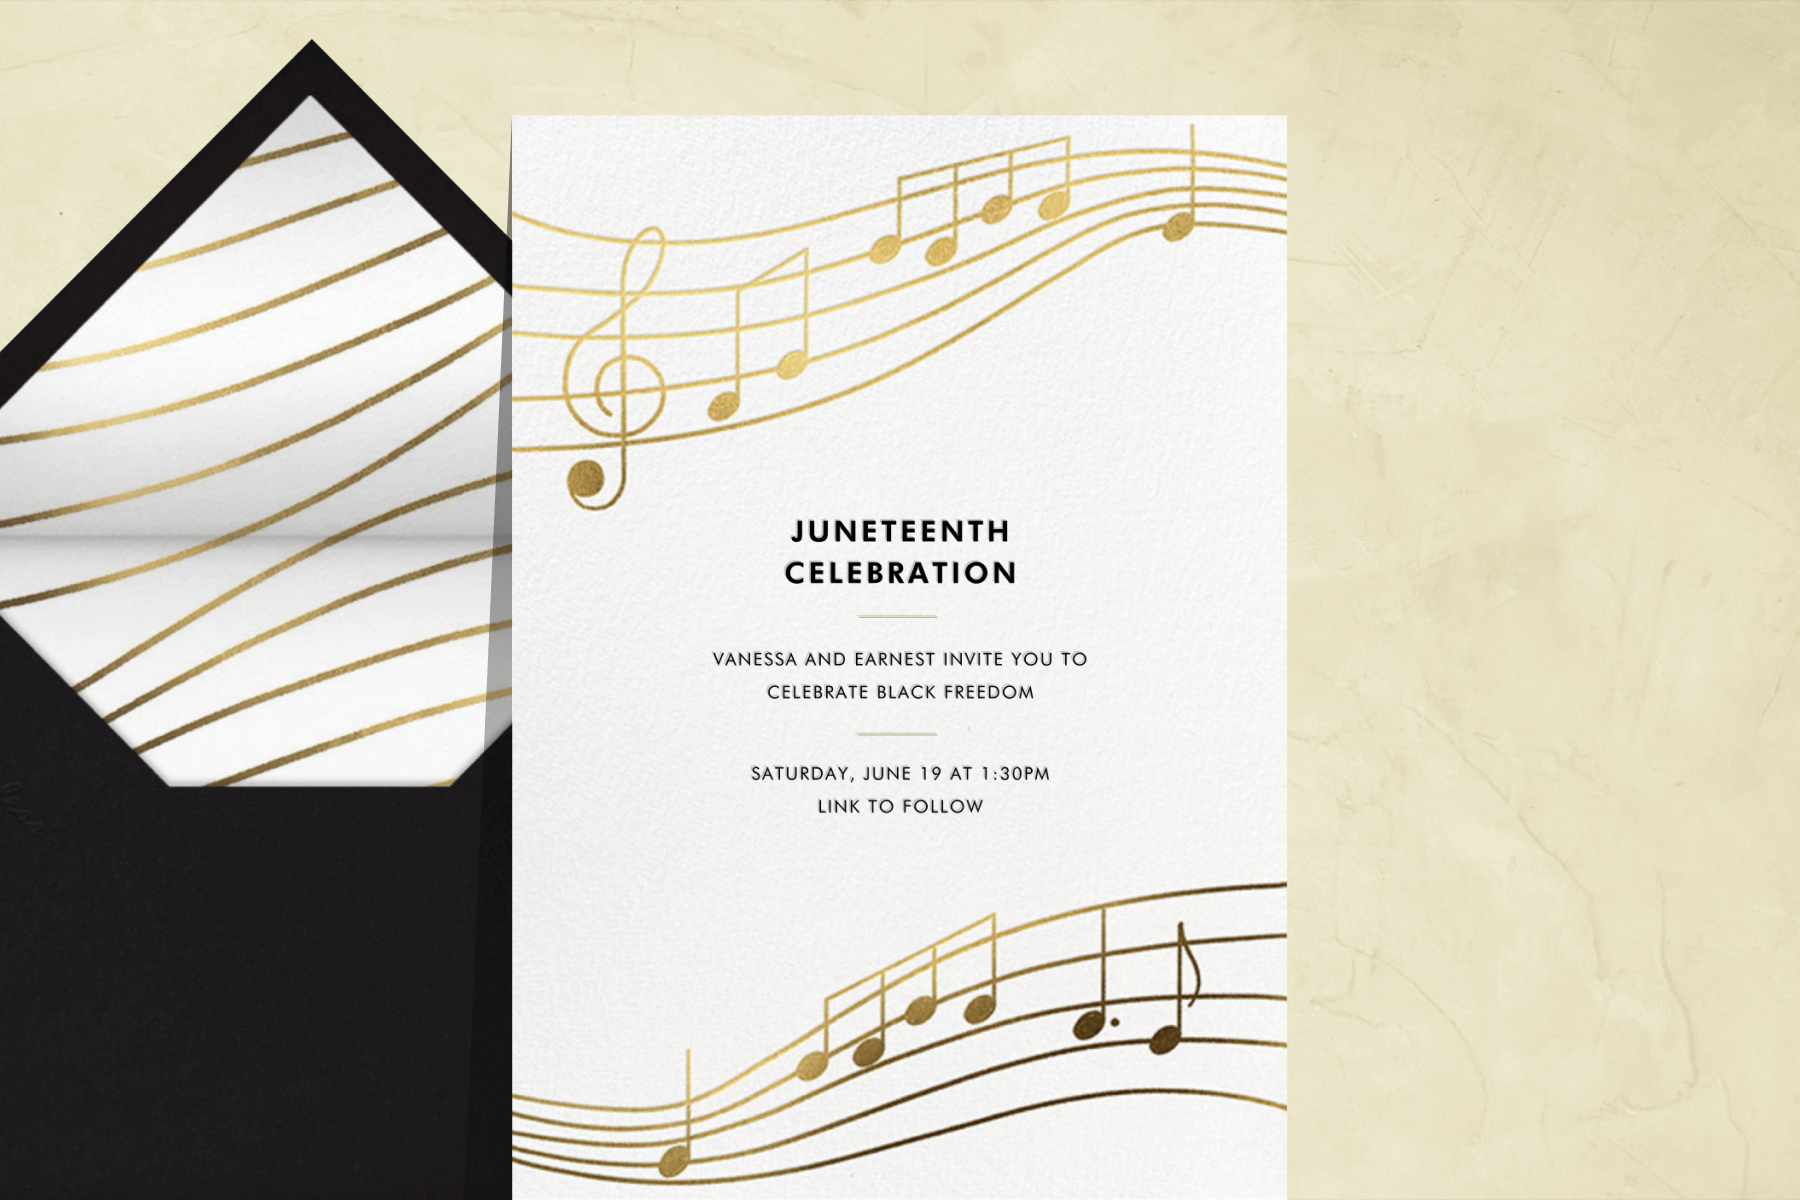 A Juneteenth invitation featuring gold music notes.